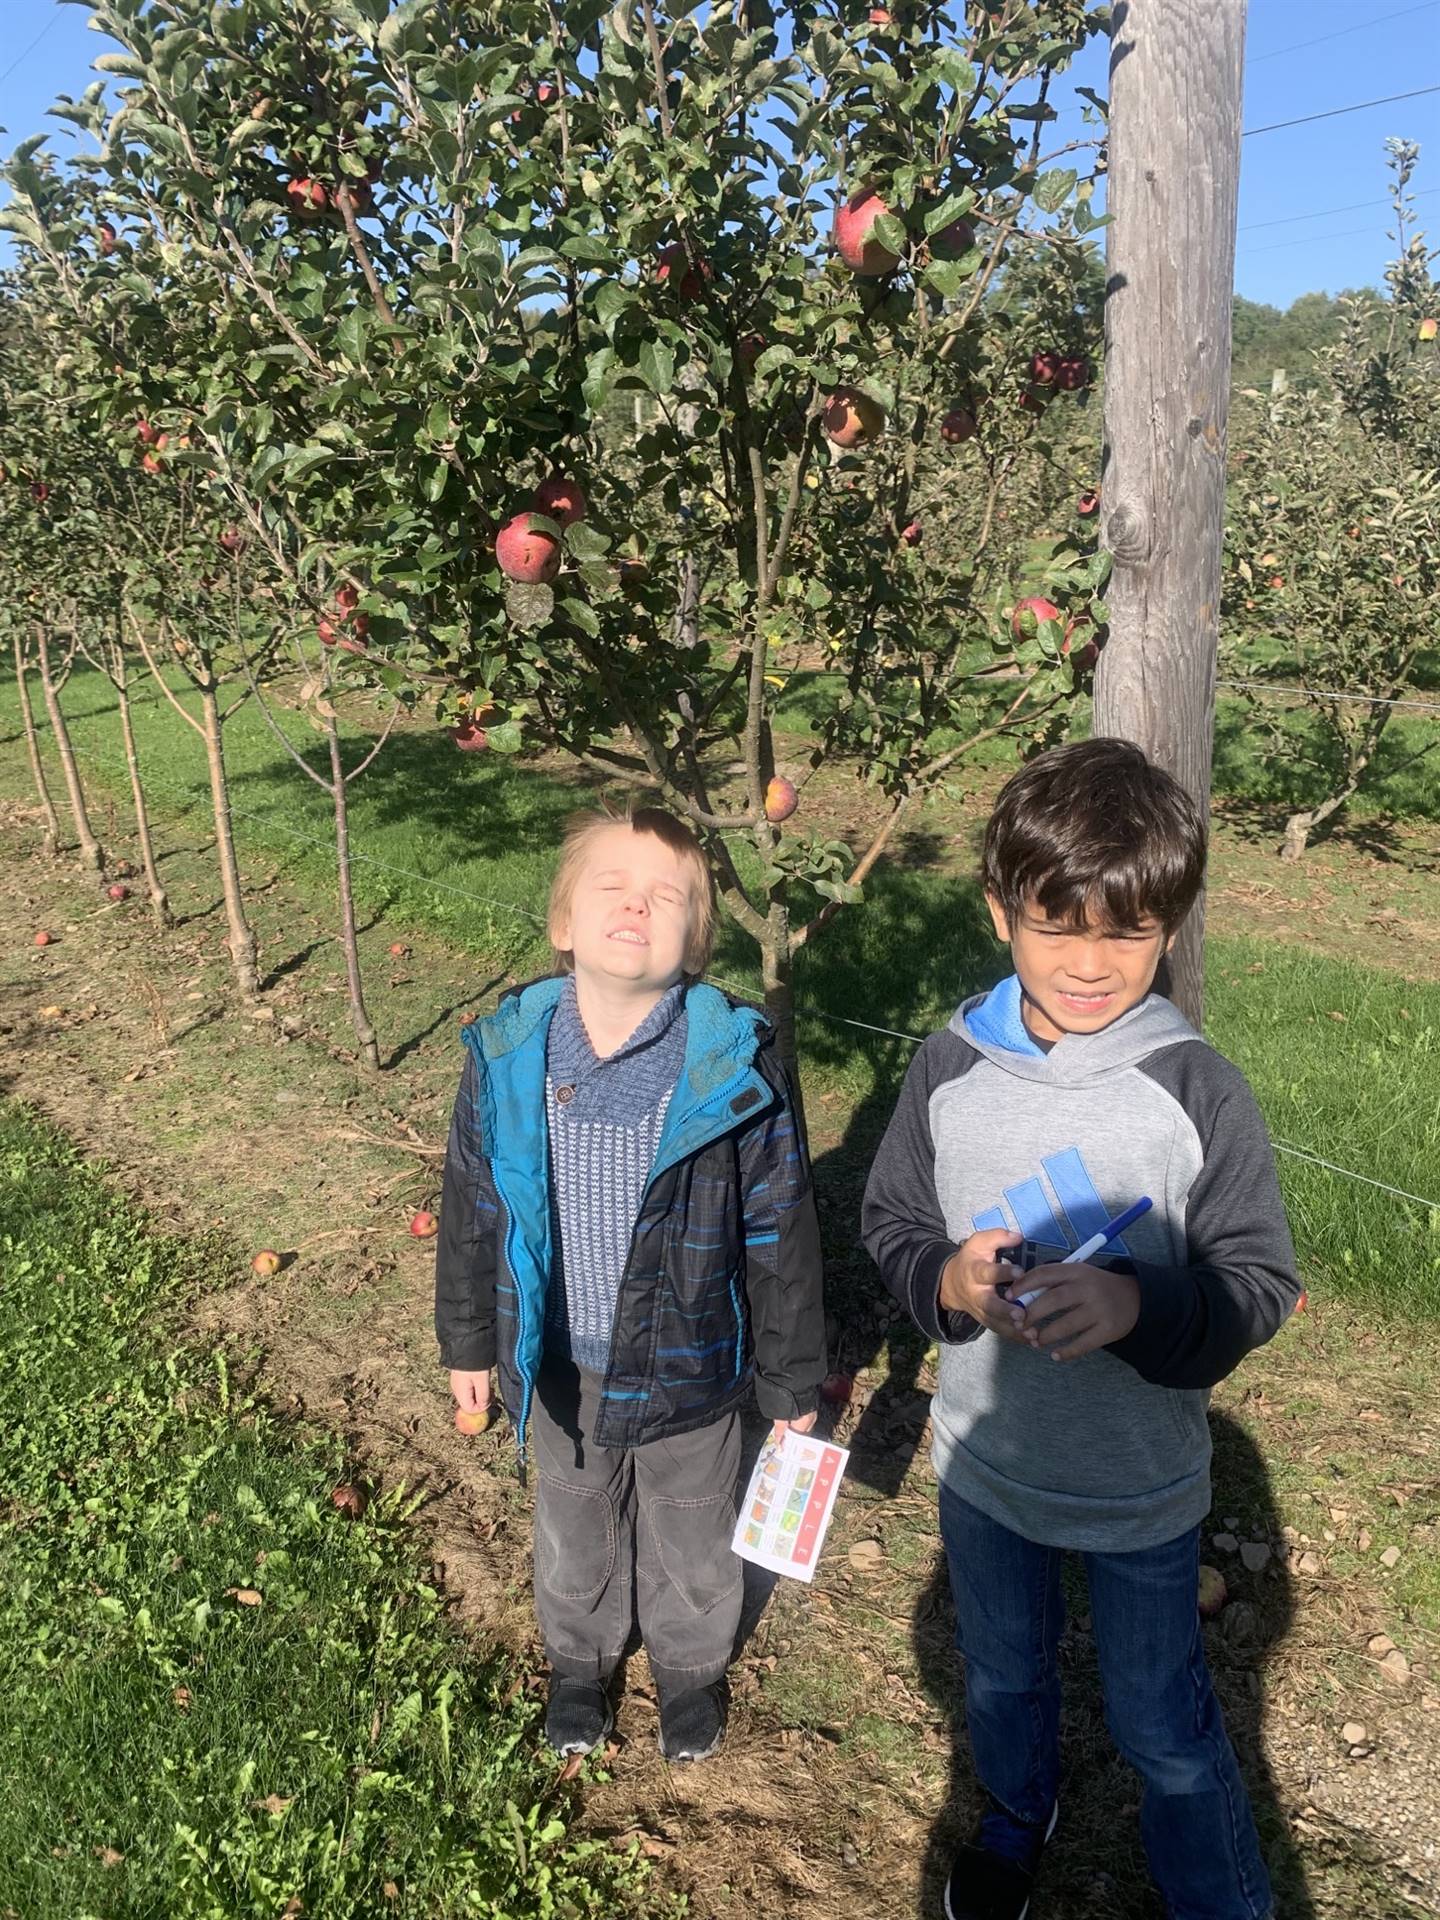 2 kids with apple tree in background